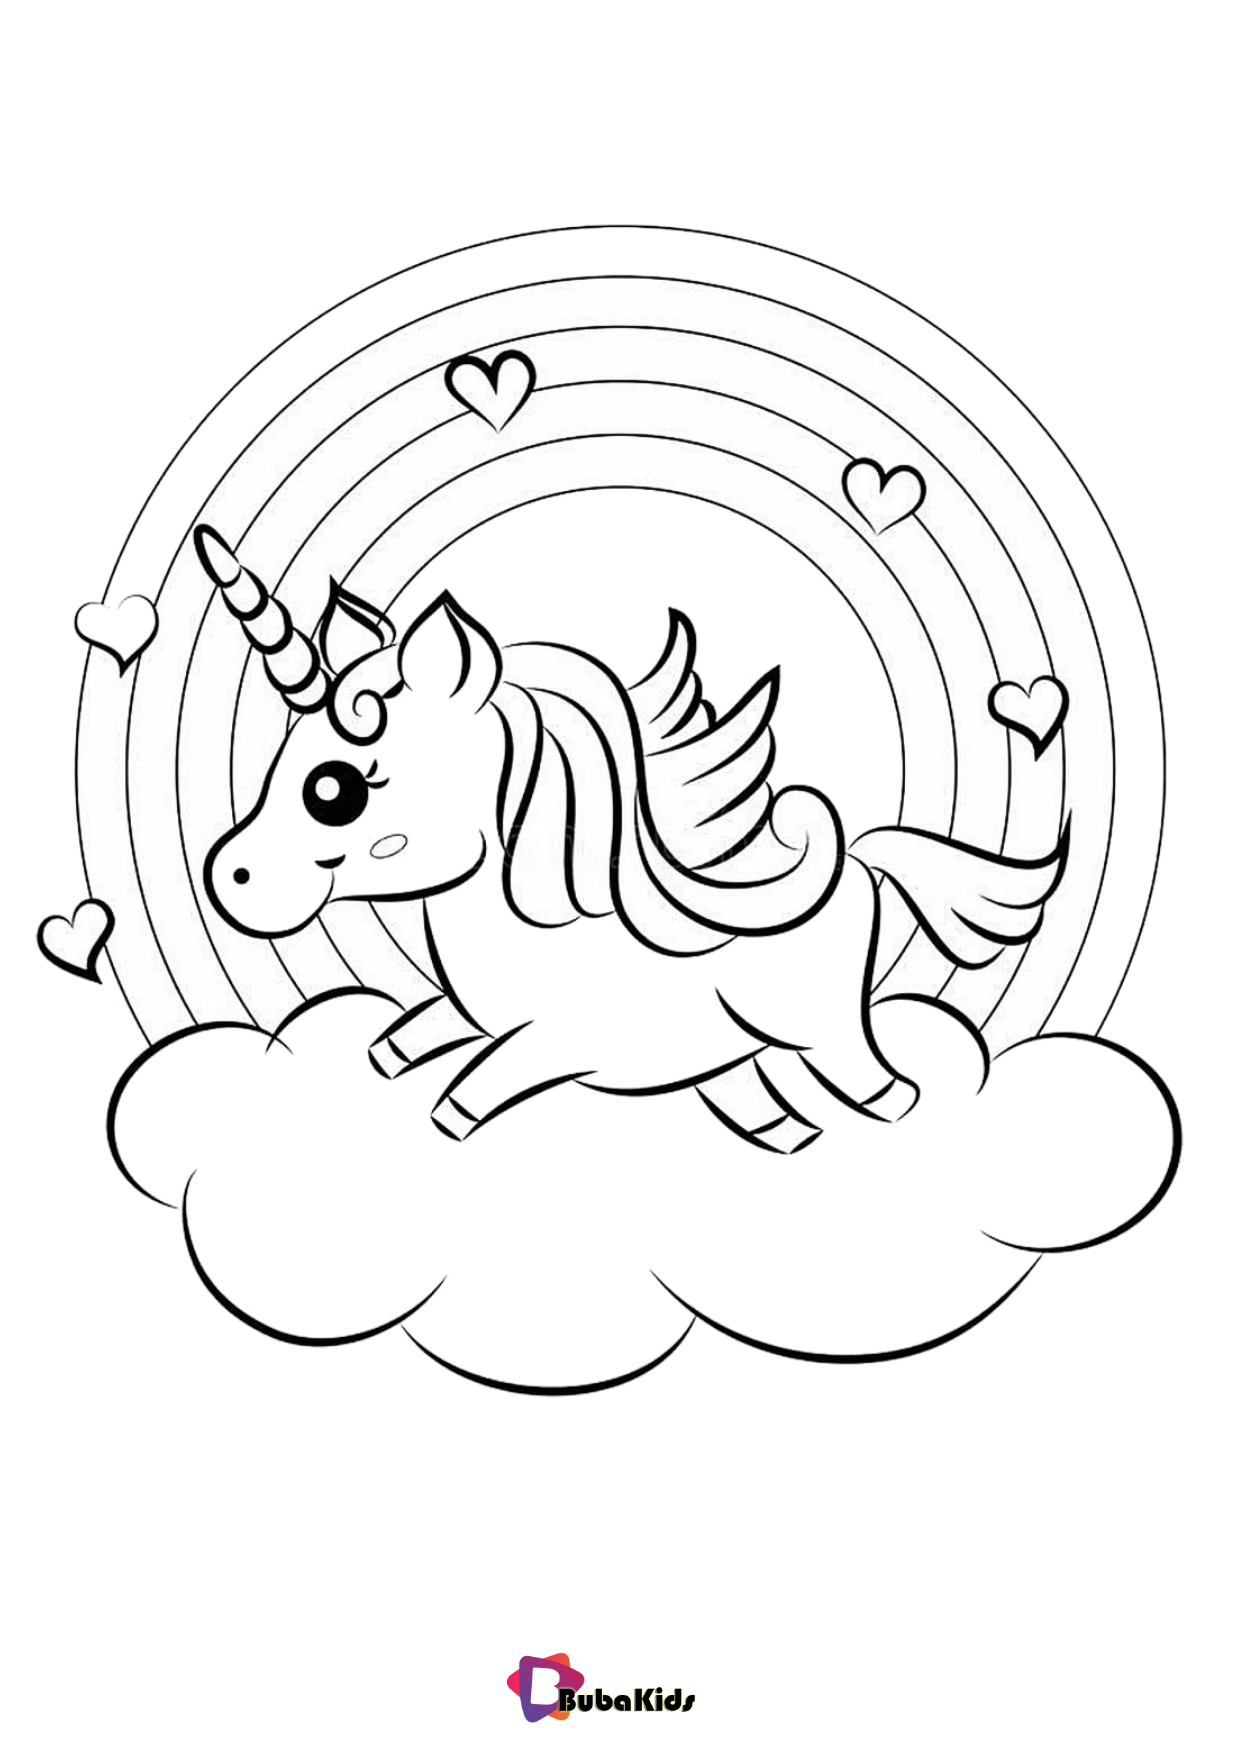 Rainbow and unicorn with cloud coloring pages Wallpaper